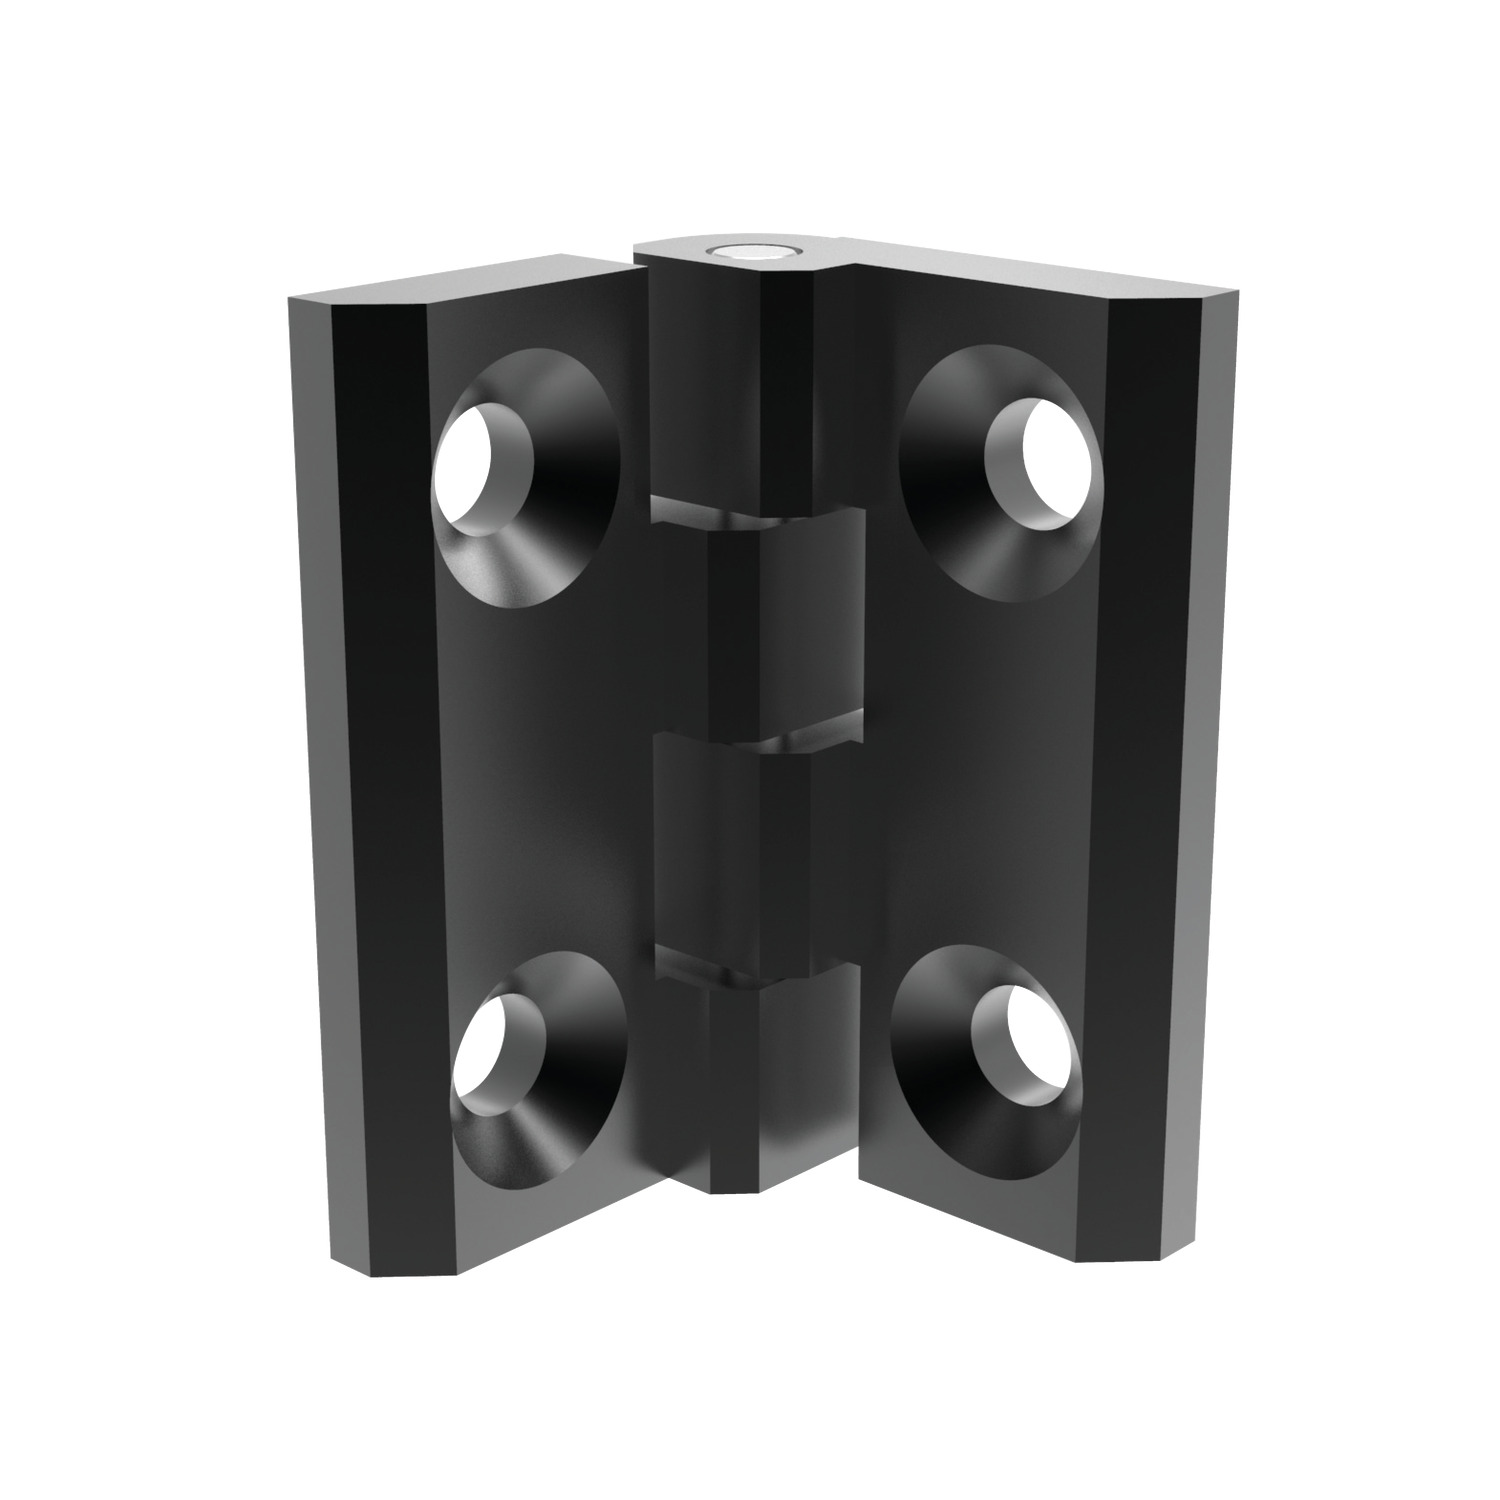 Surface Mount - Leaf Hinges For plain/flush mounted doors, as well as electrical panels and covers. Made from die cast zinc with black powder coat